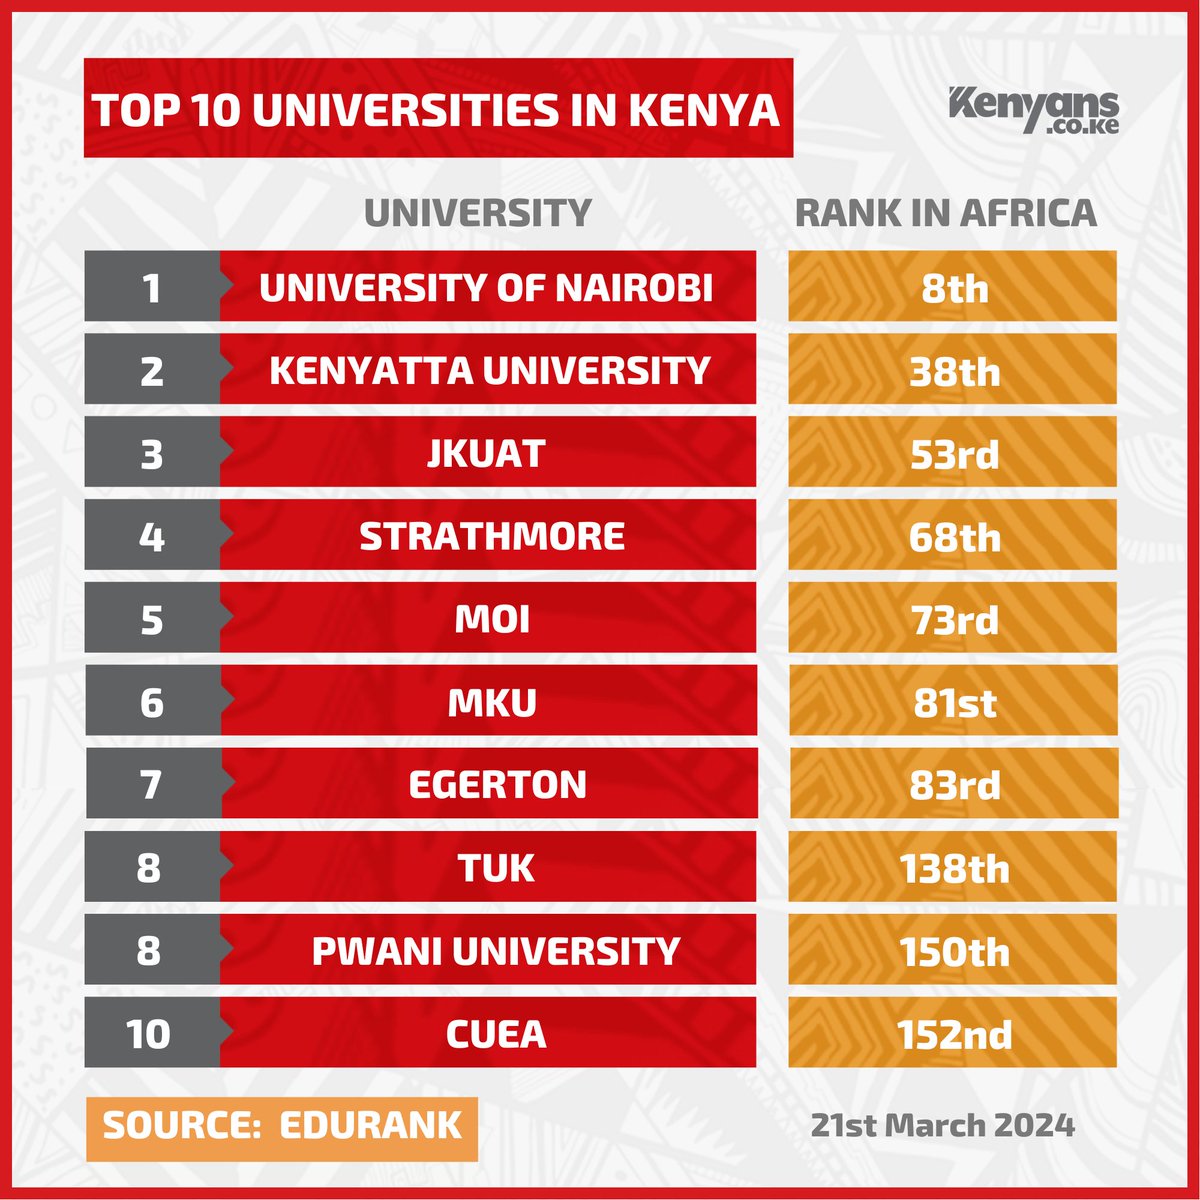 These are the top 10 universities in Kenya and their corresponding rank in the continent #KenyansData